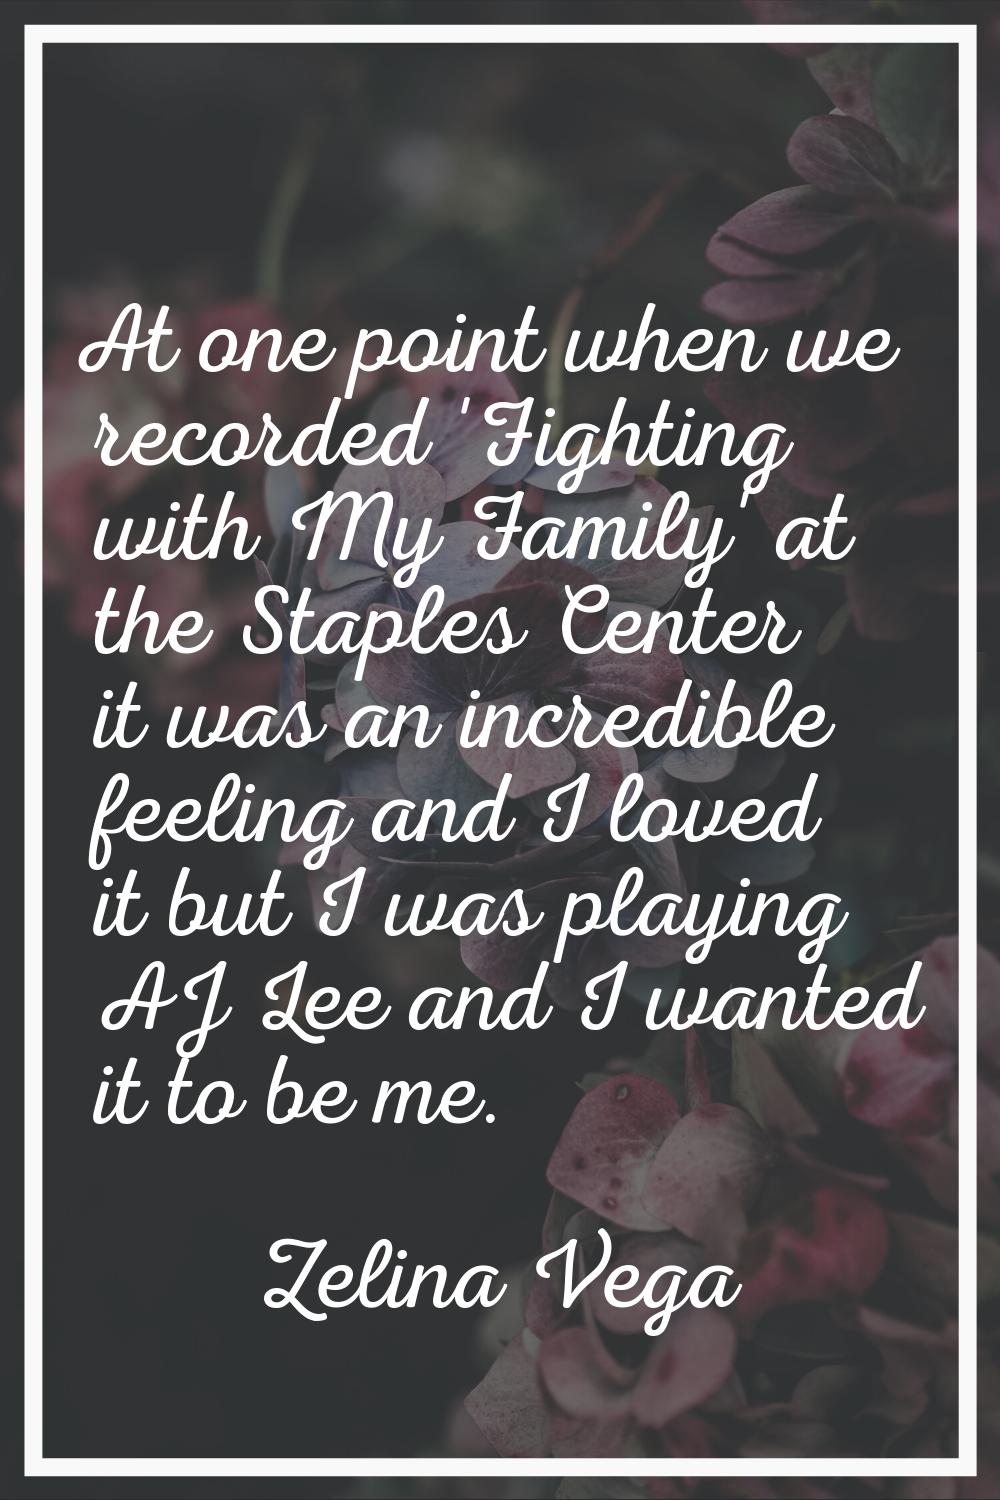 At one point when we recorded 'Fighting with My Family' at the Staples Center it was an incredible 